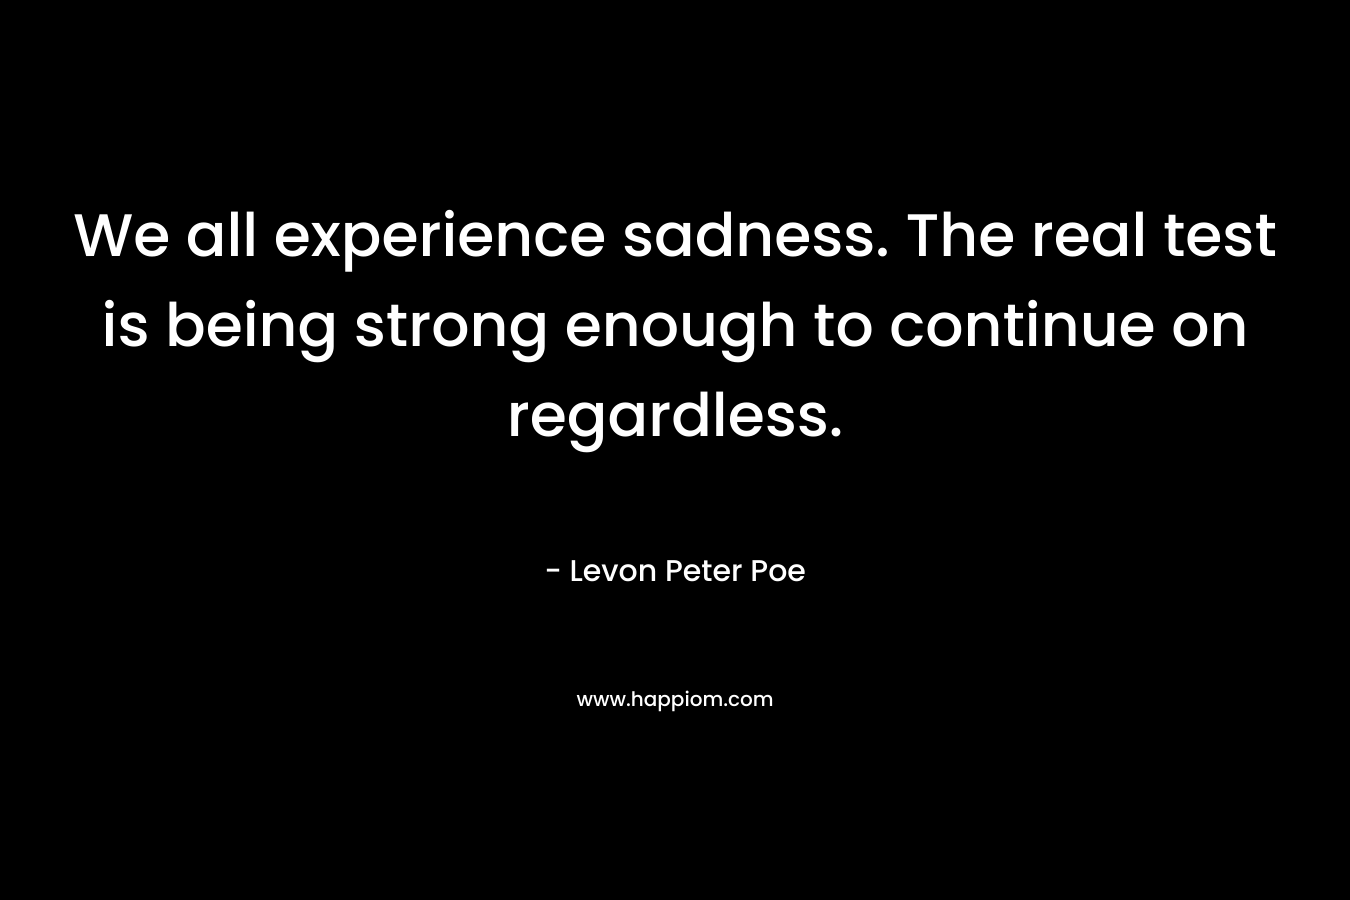 We all experience sadness. The real test is being strong enough to continue on regardless.